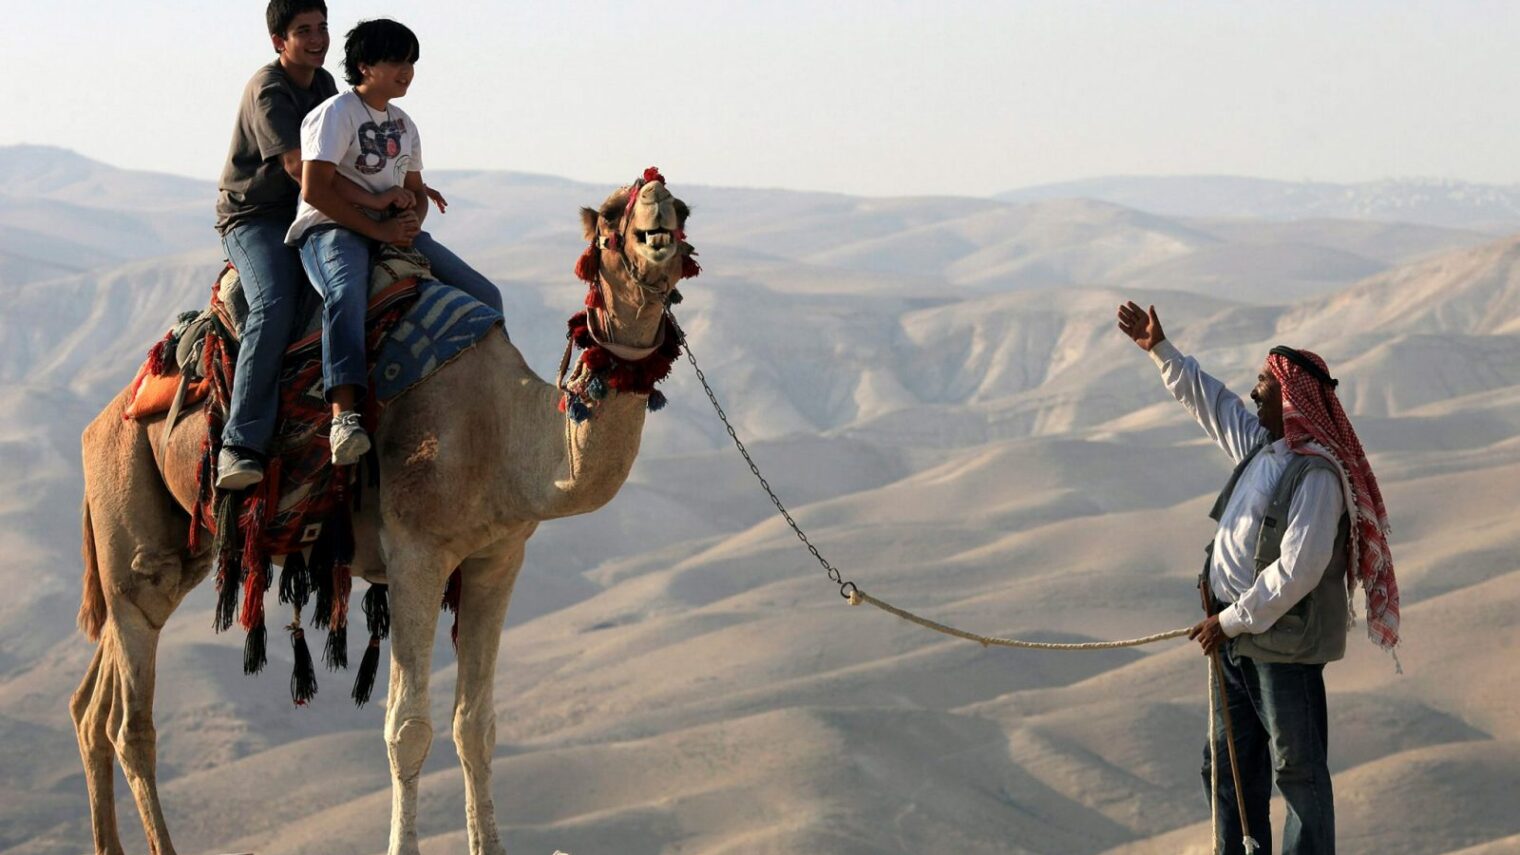 Young Israelis ride on a camel in the Judean desert. Photo by Nati Shohat/FLASH90